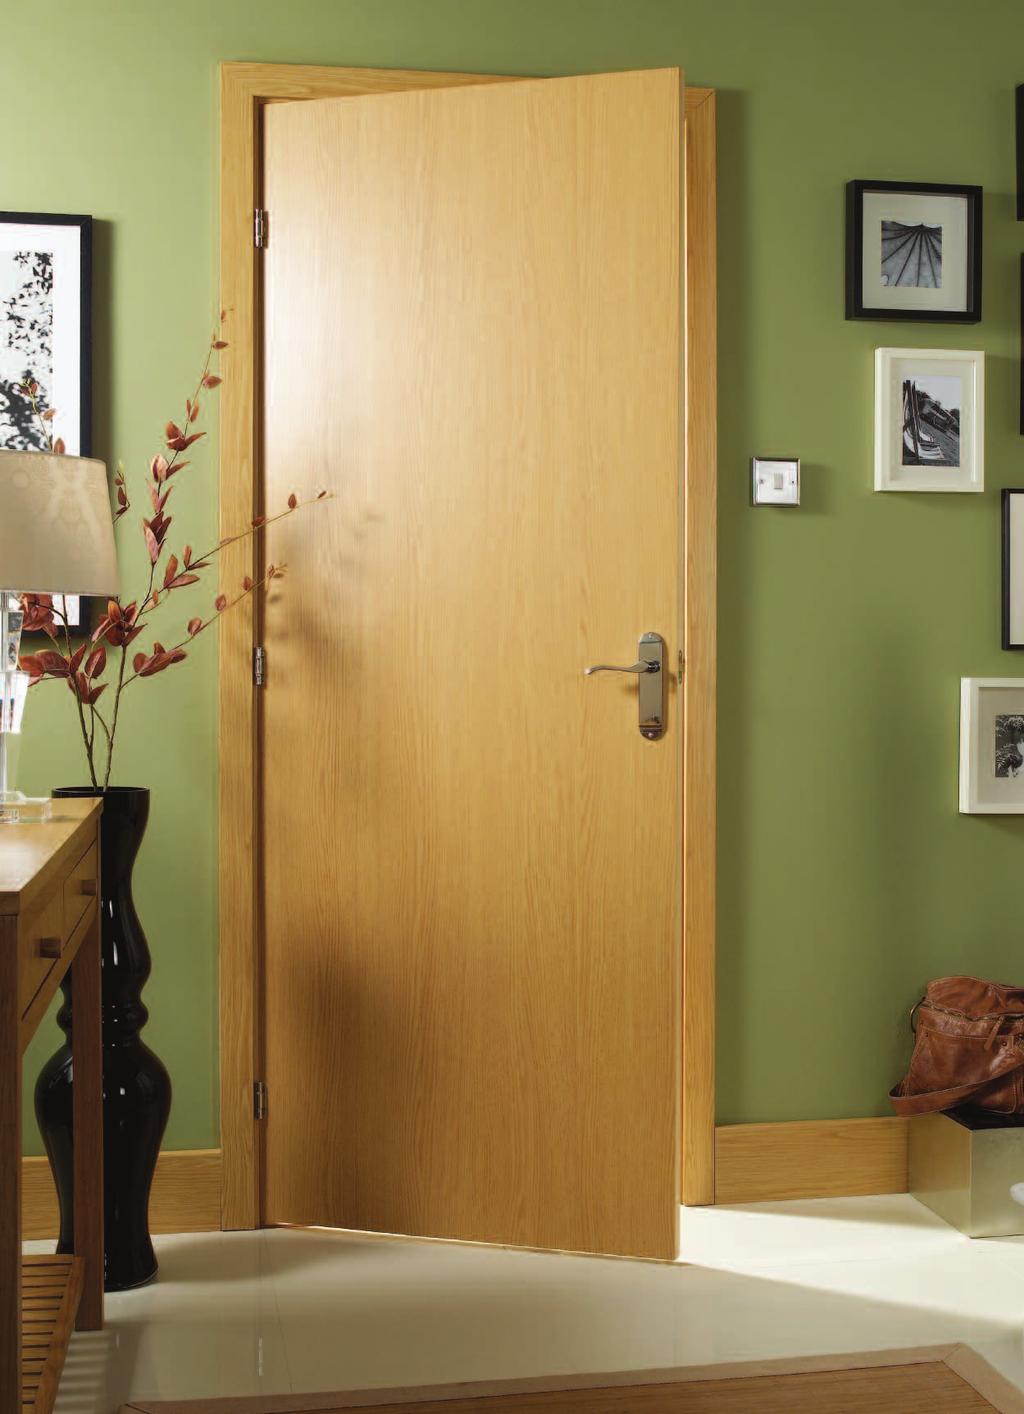 SpeedSet Plus The perfect solution for imperfect walls unique features Doorset adjustability allows for uneven walls and ensures